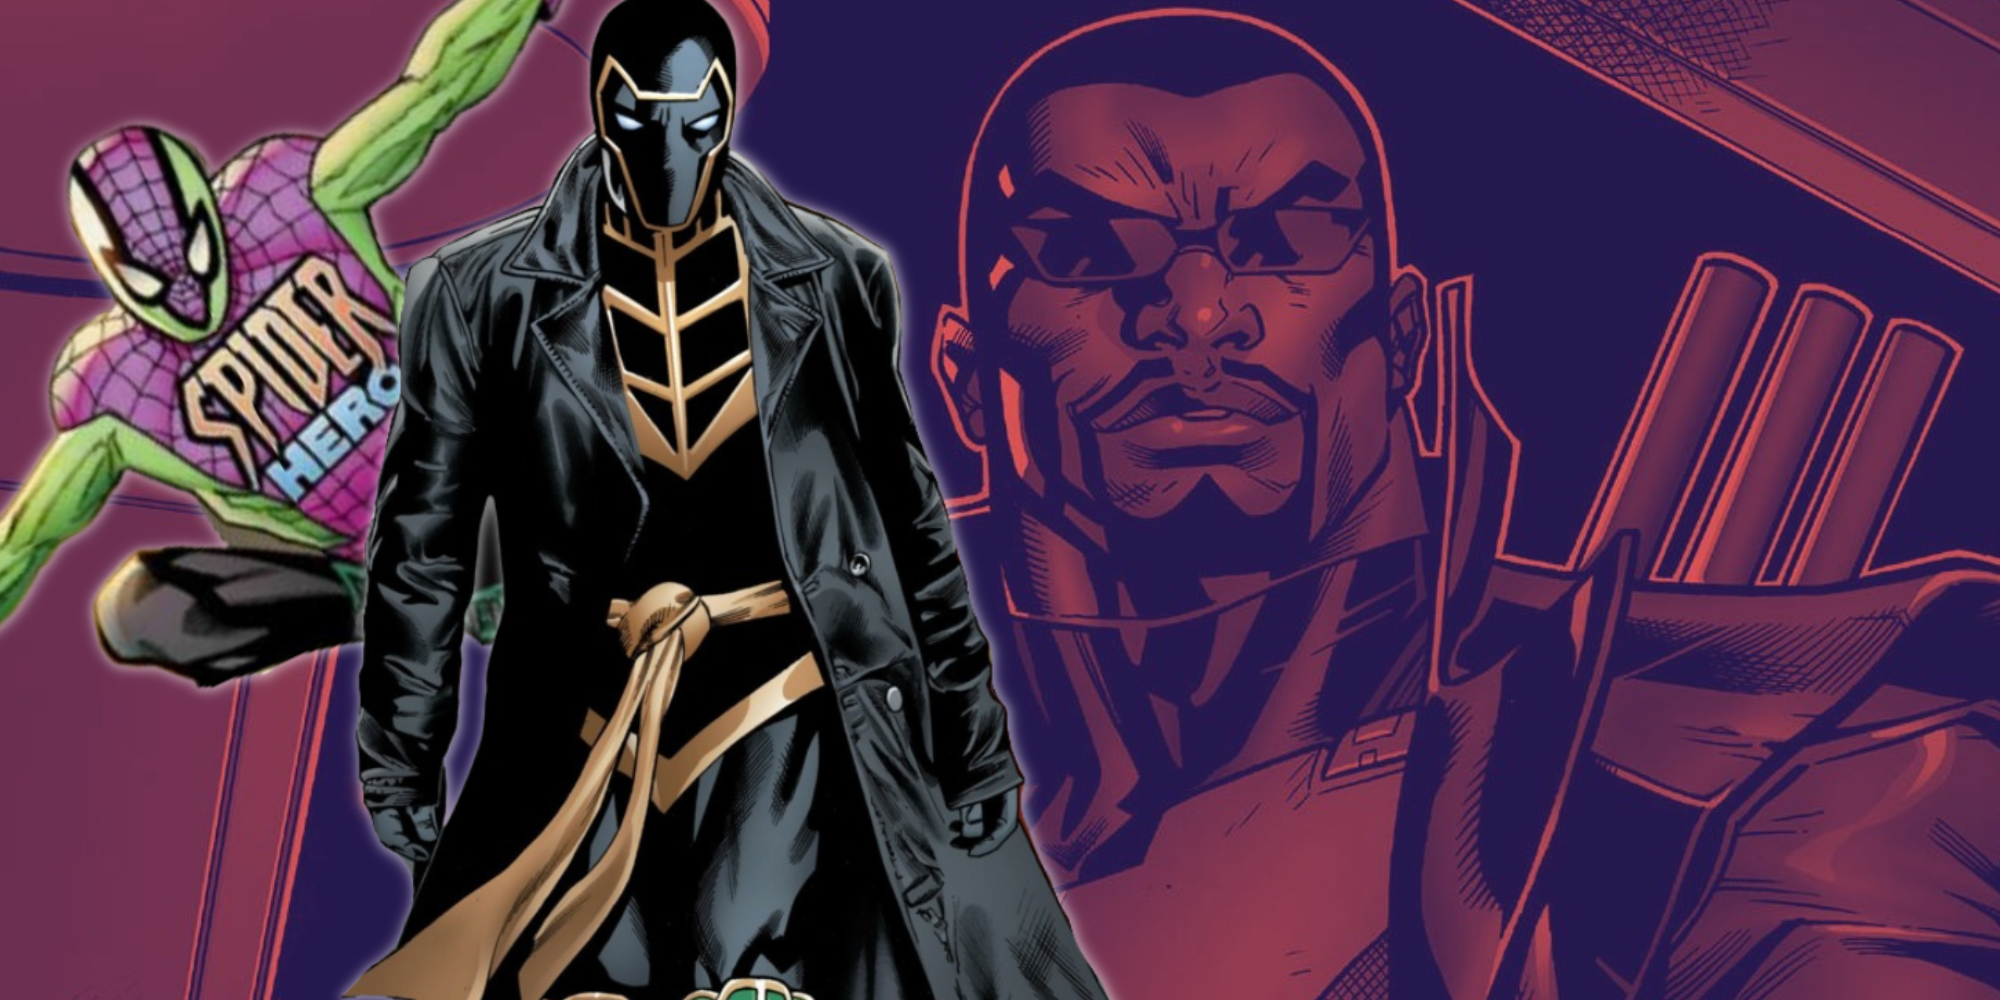 Blade as Spider-Hero and Ronin from the Mighty Avengers